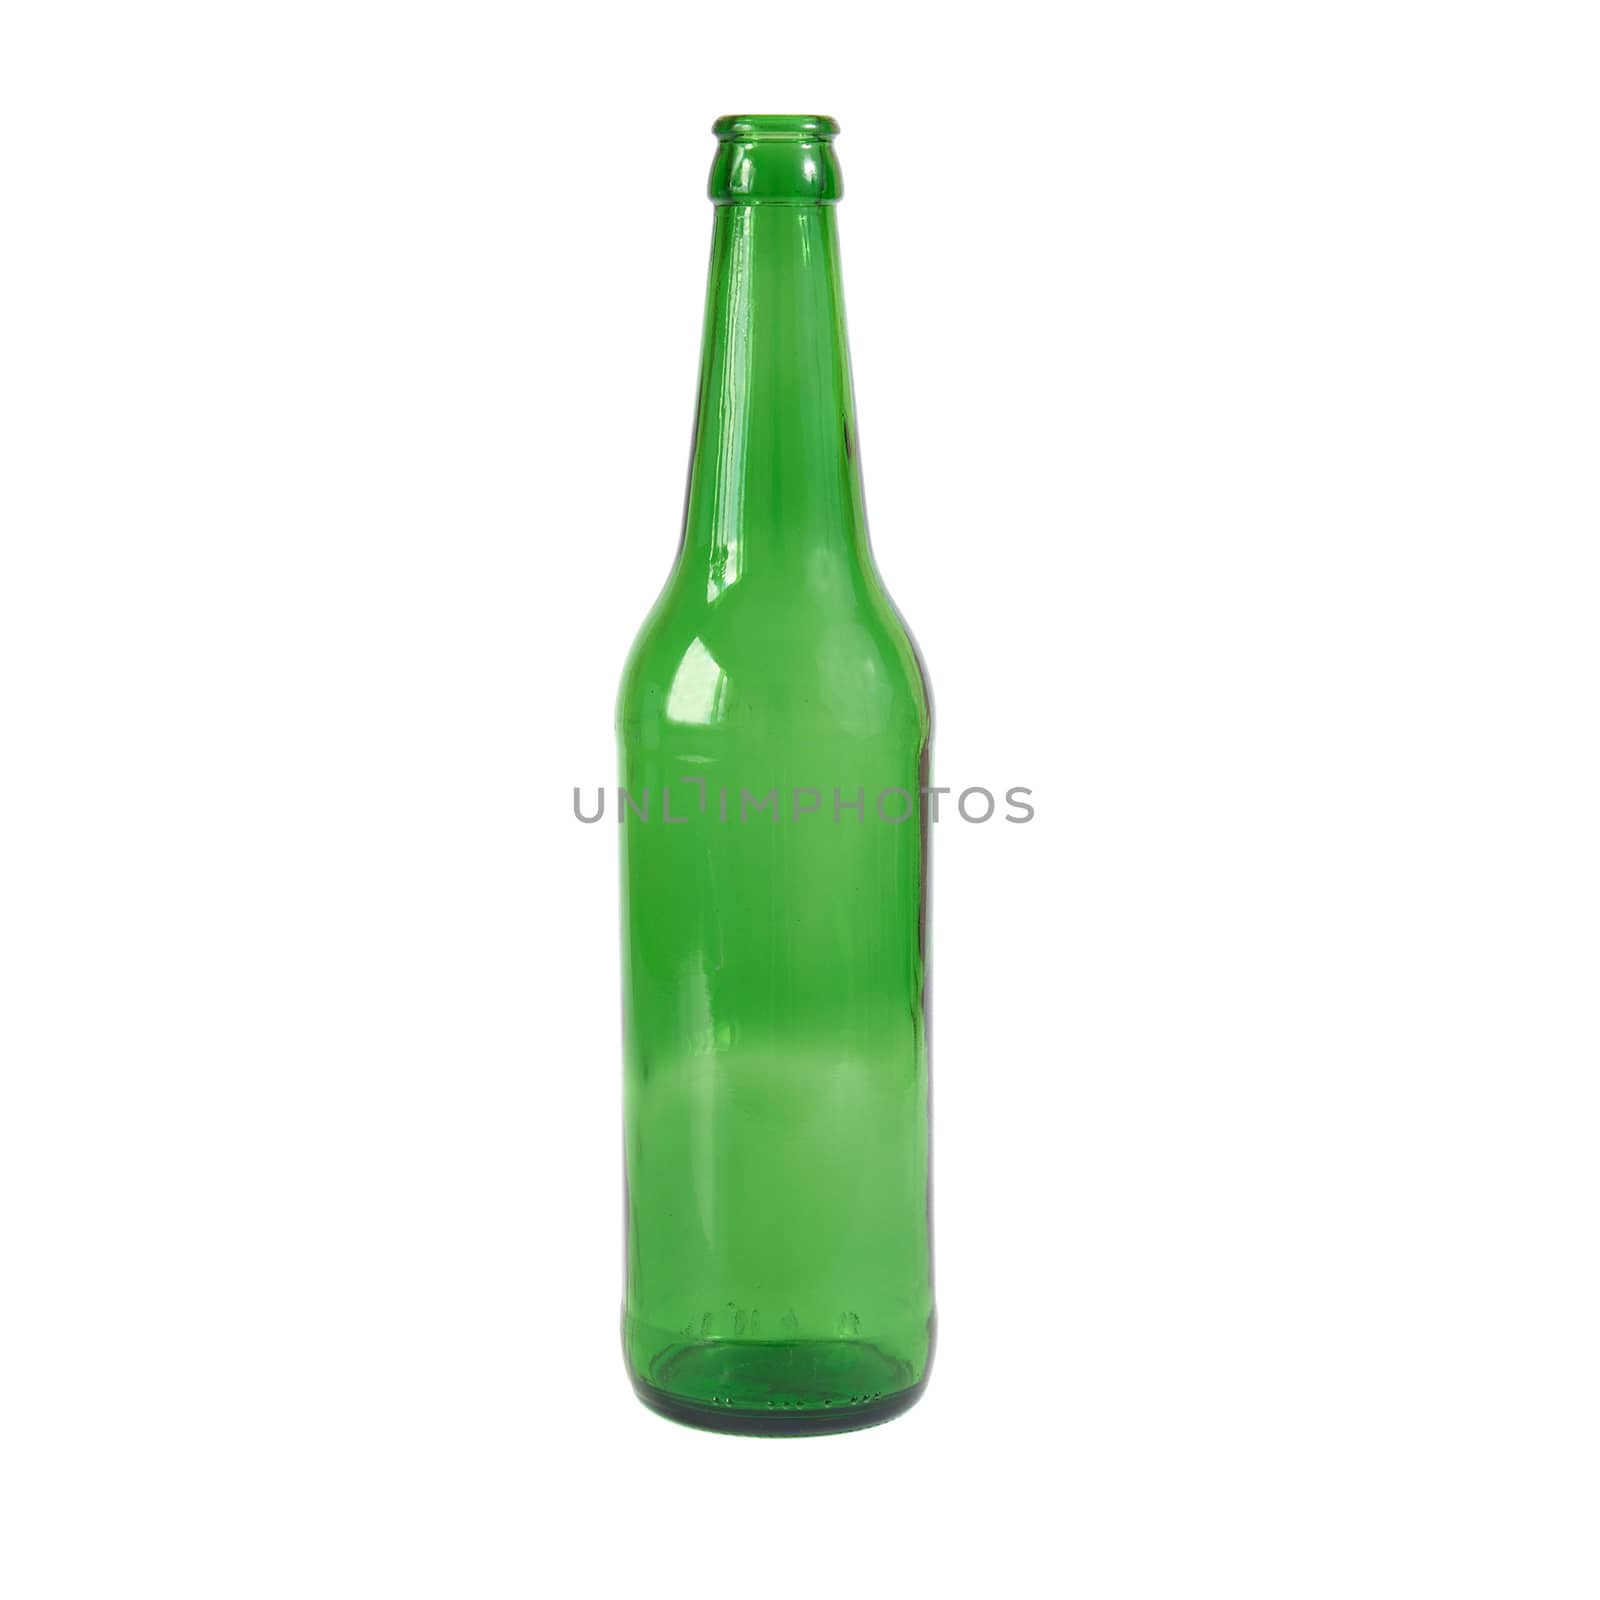 Green bottle isolated on the white background